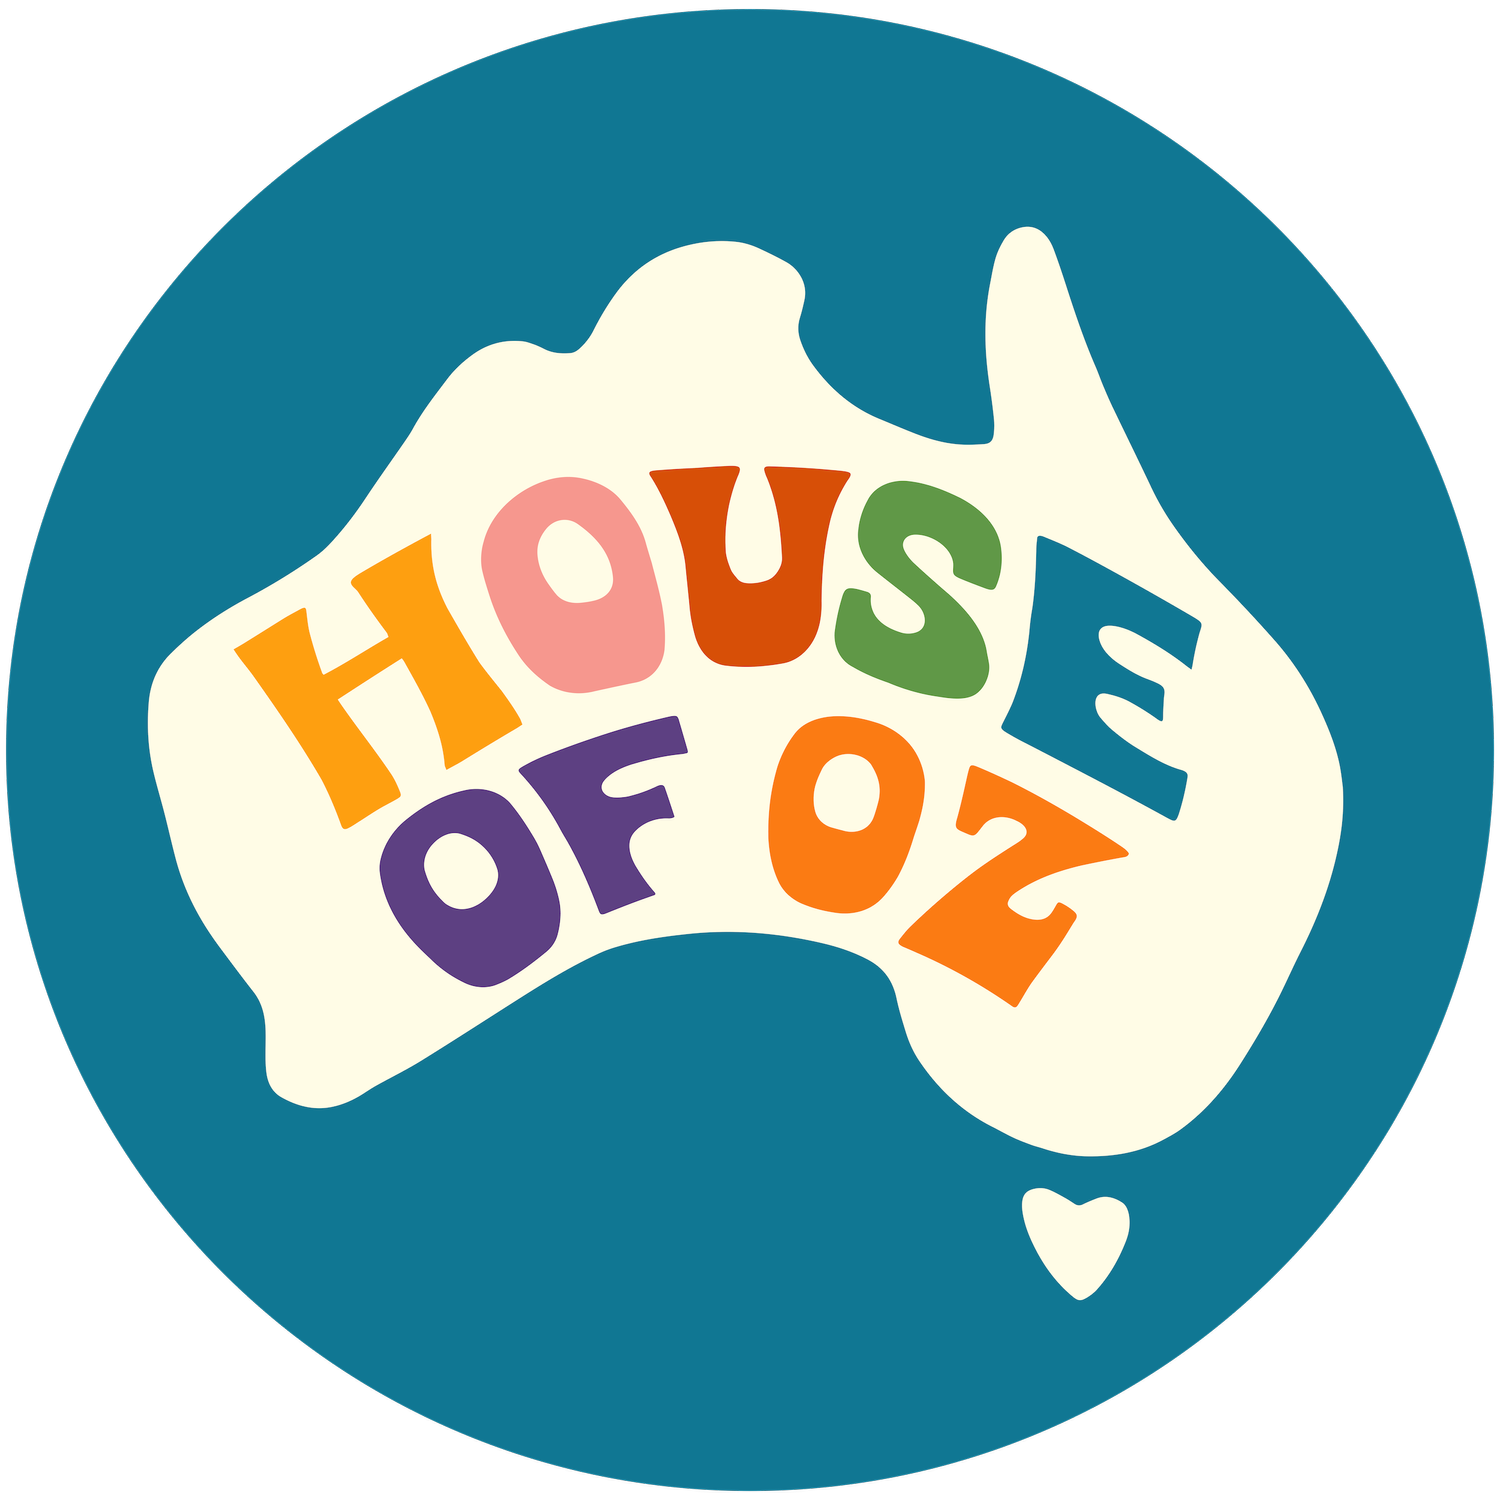 House of Oz